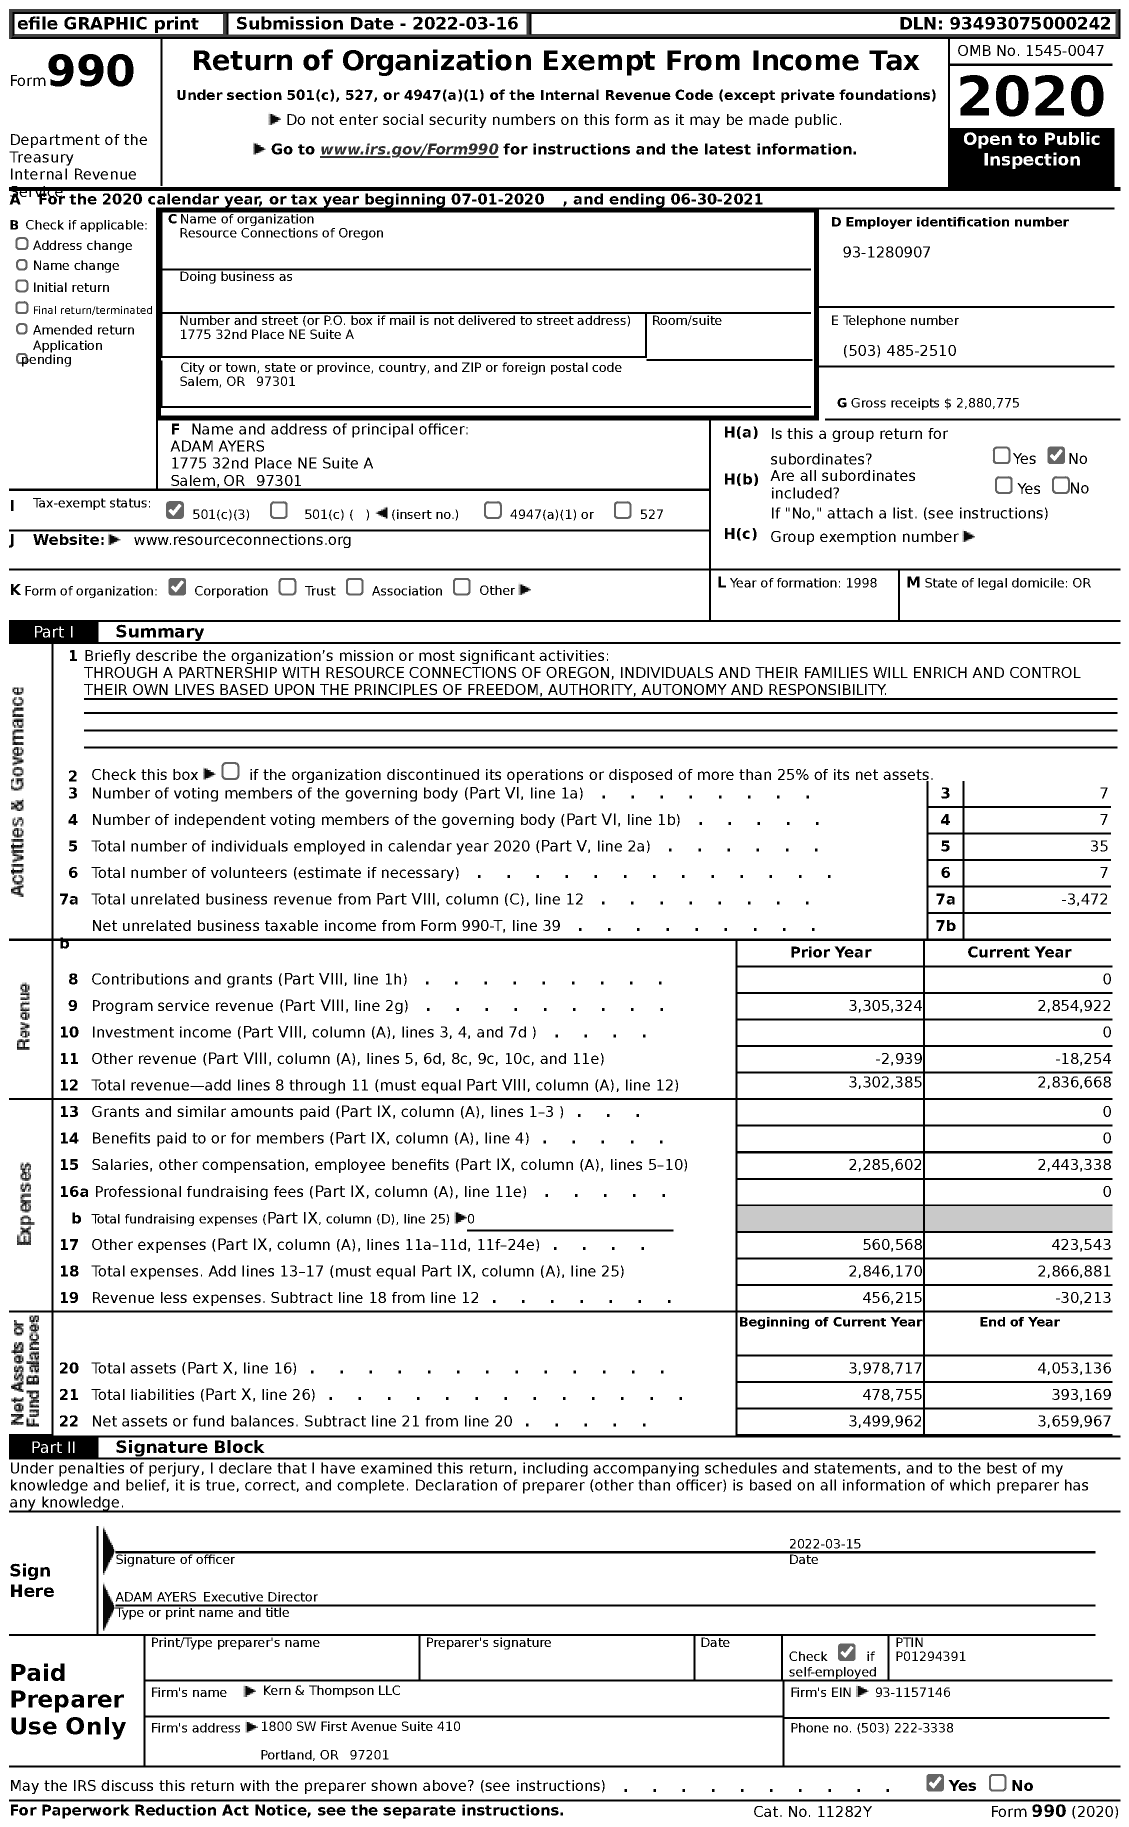 Image of first page of 2020 Form 990 for Resource Connections of Oregon (RCO)